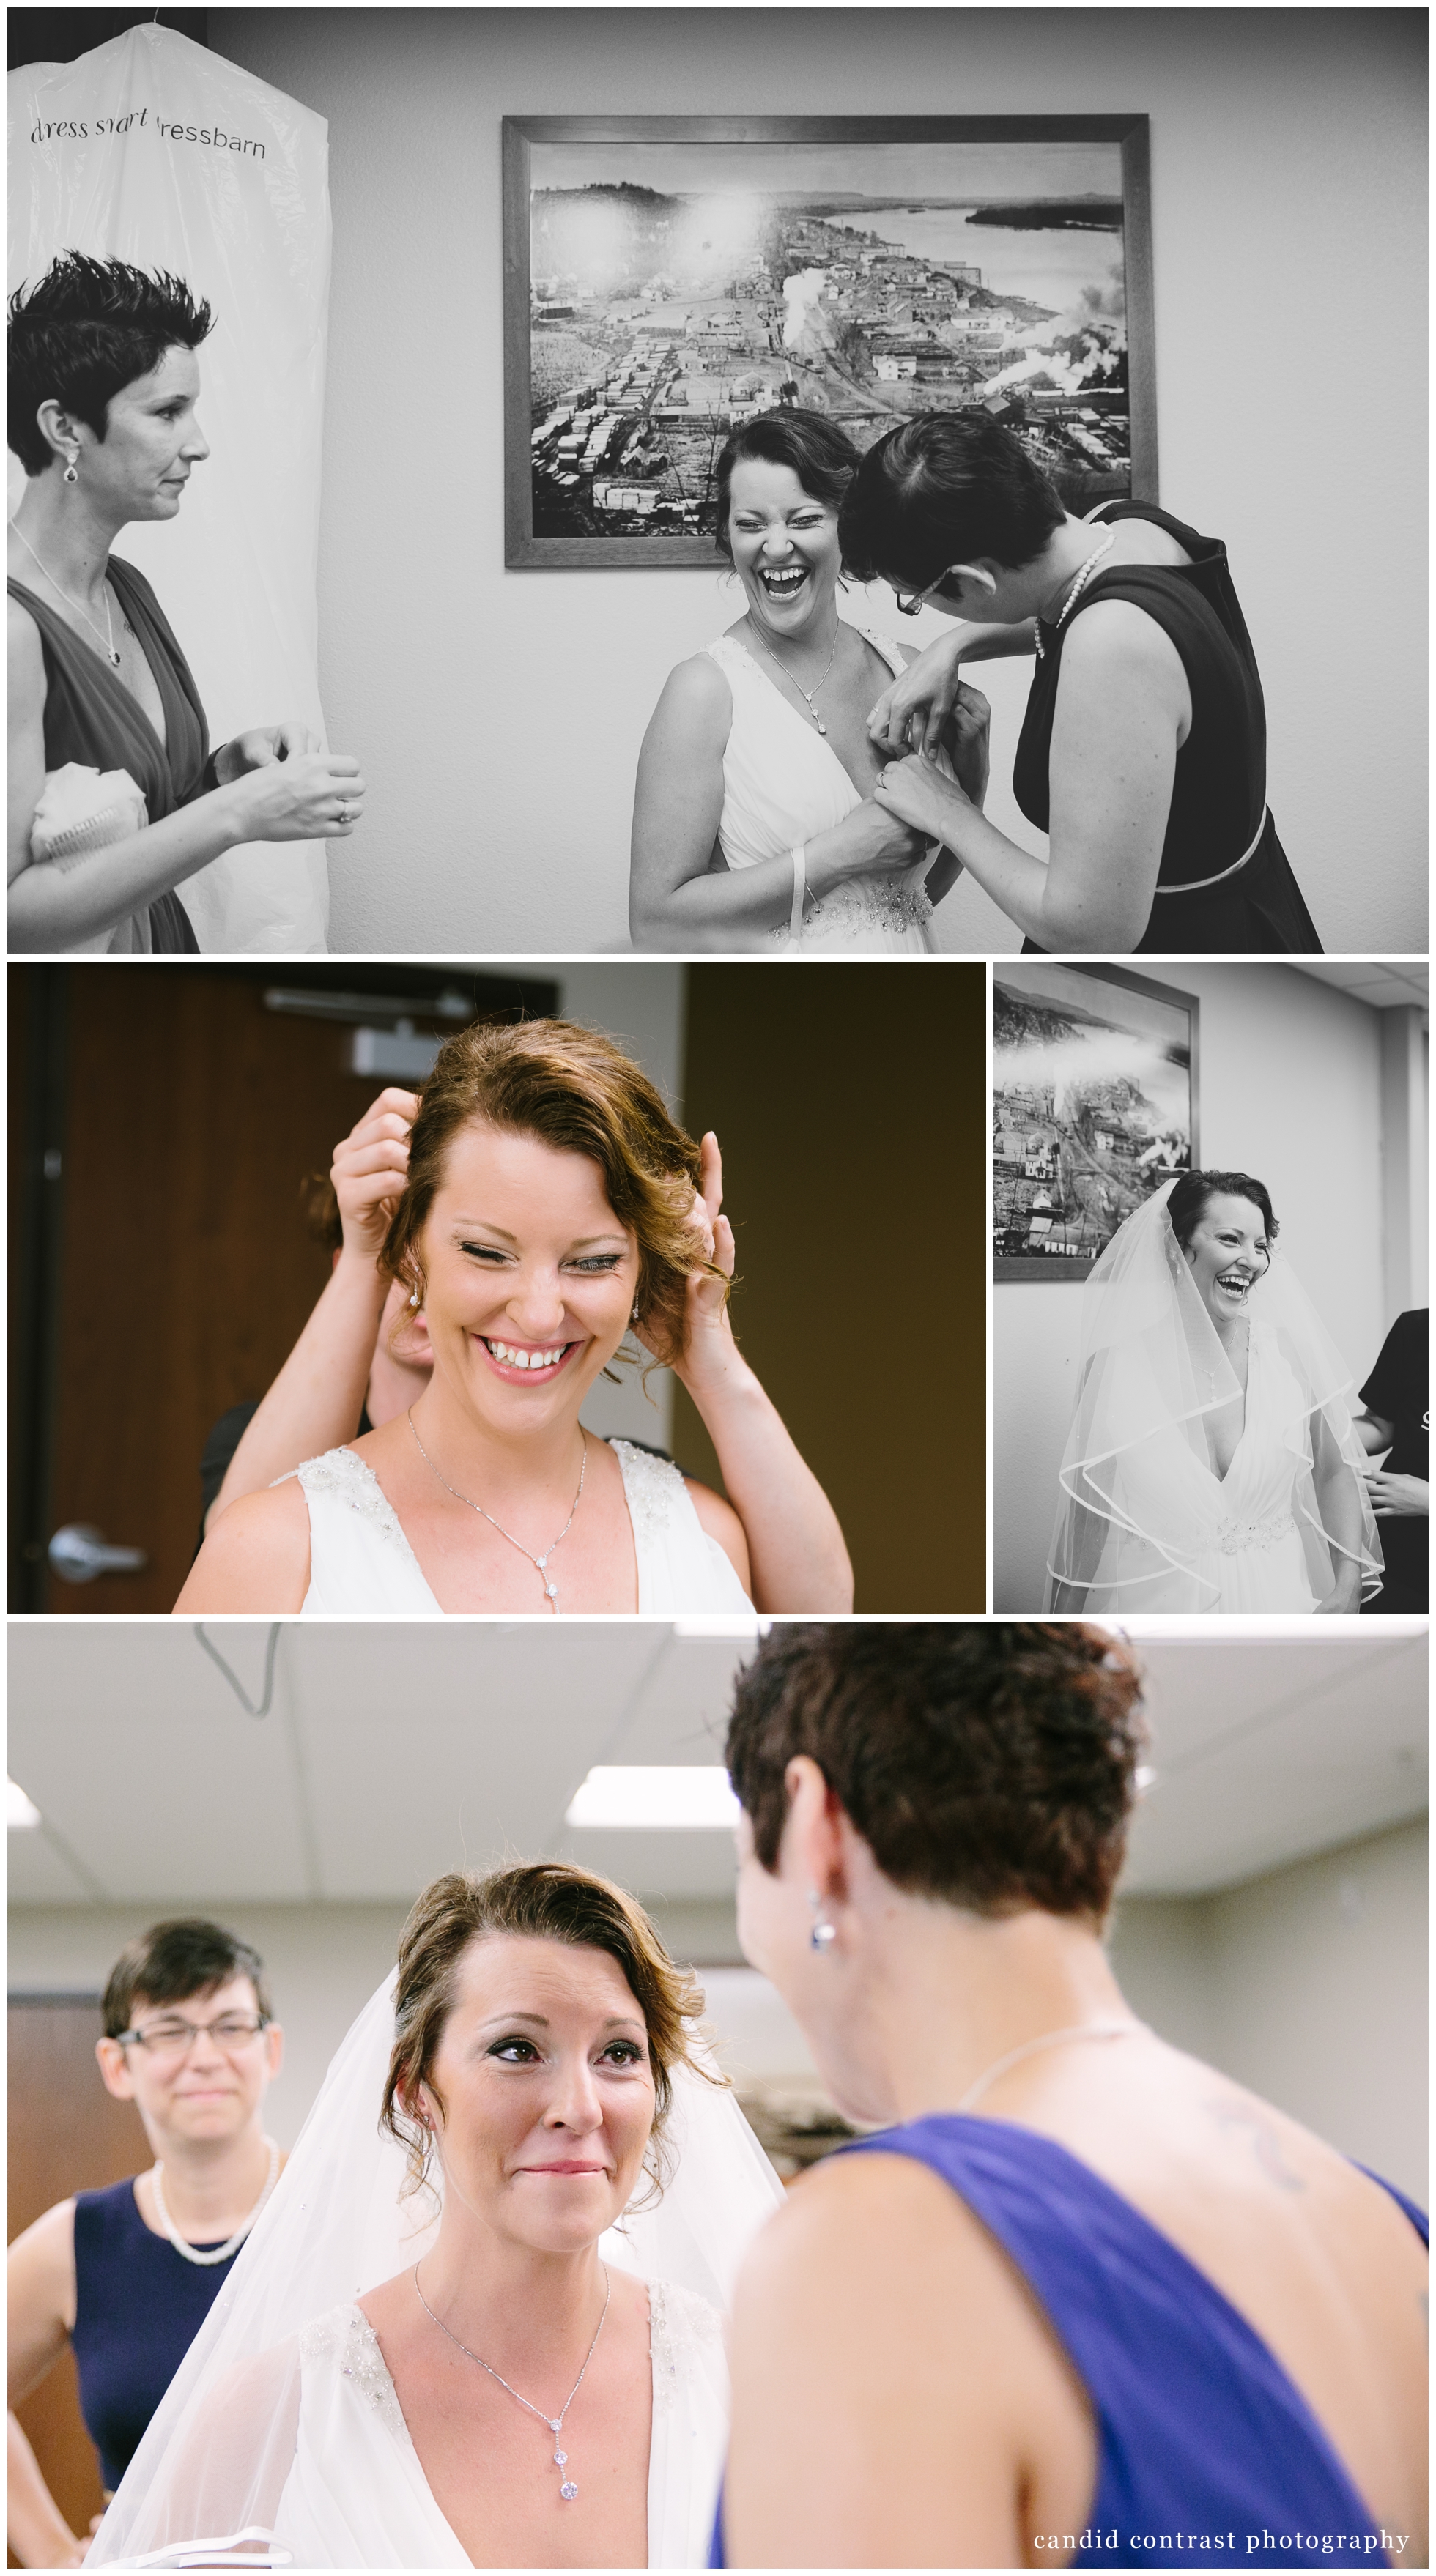 getting ready for a bellevue iowa outdoor wedding at the shore event center, iowa wedding photographer candid contrast photography